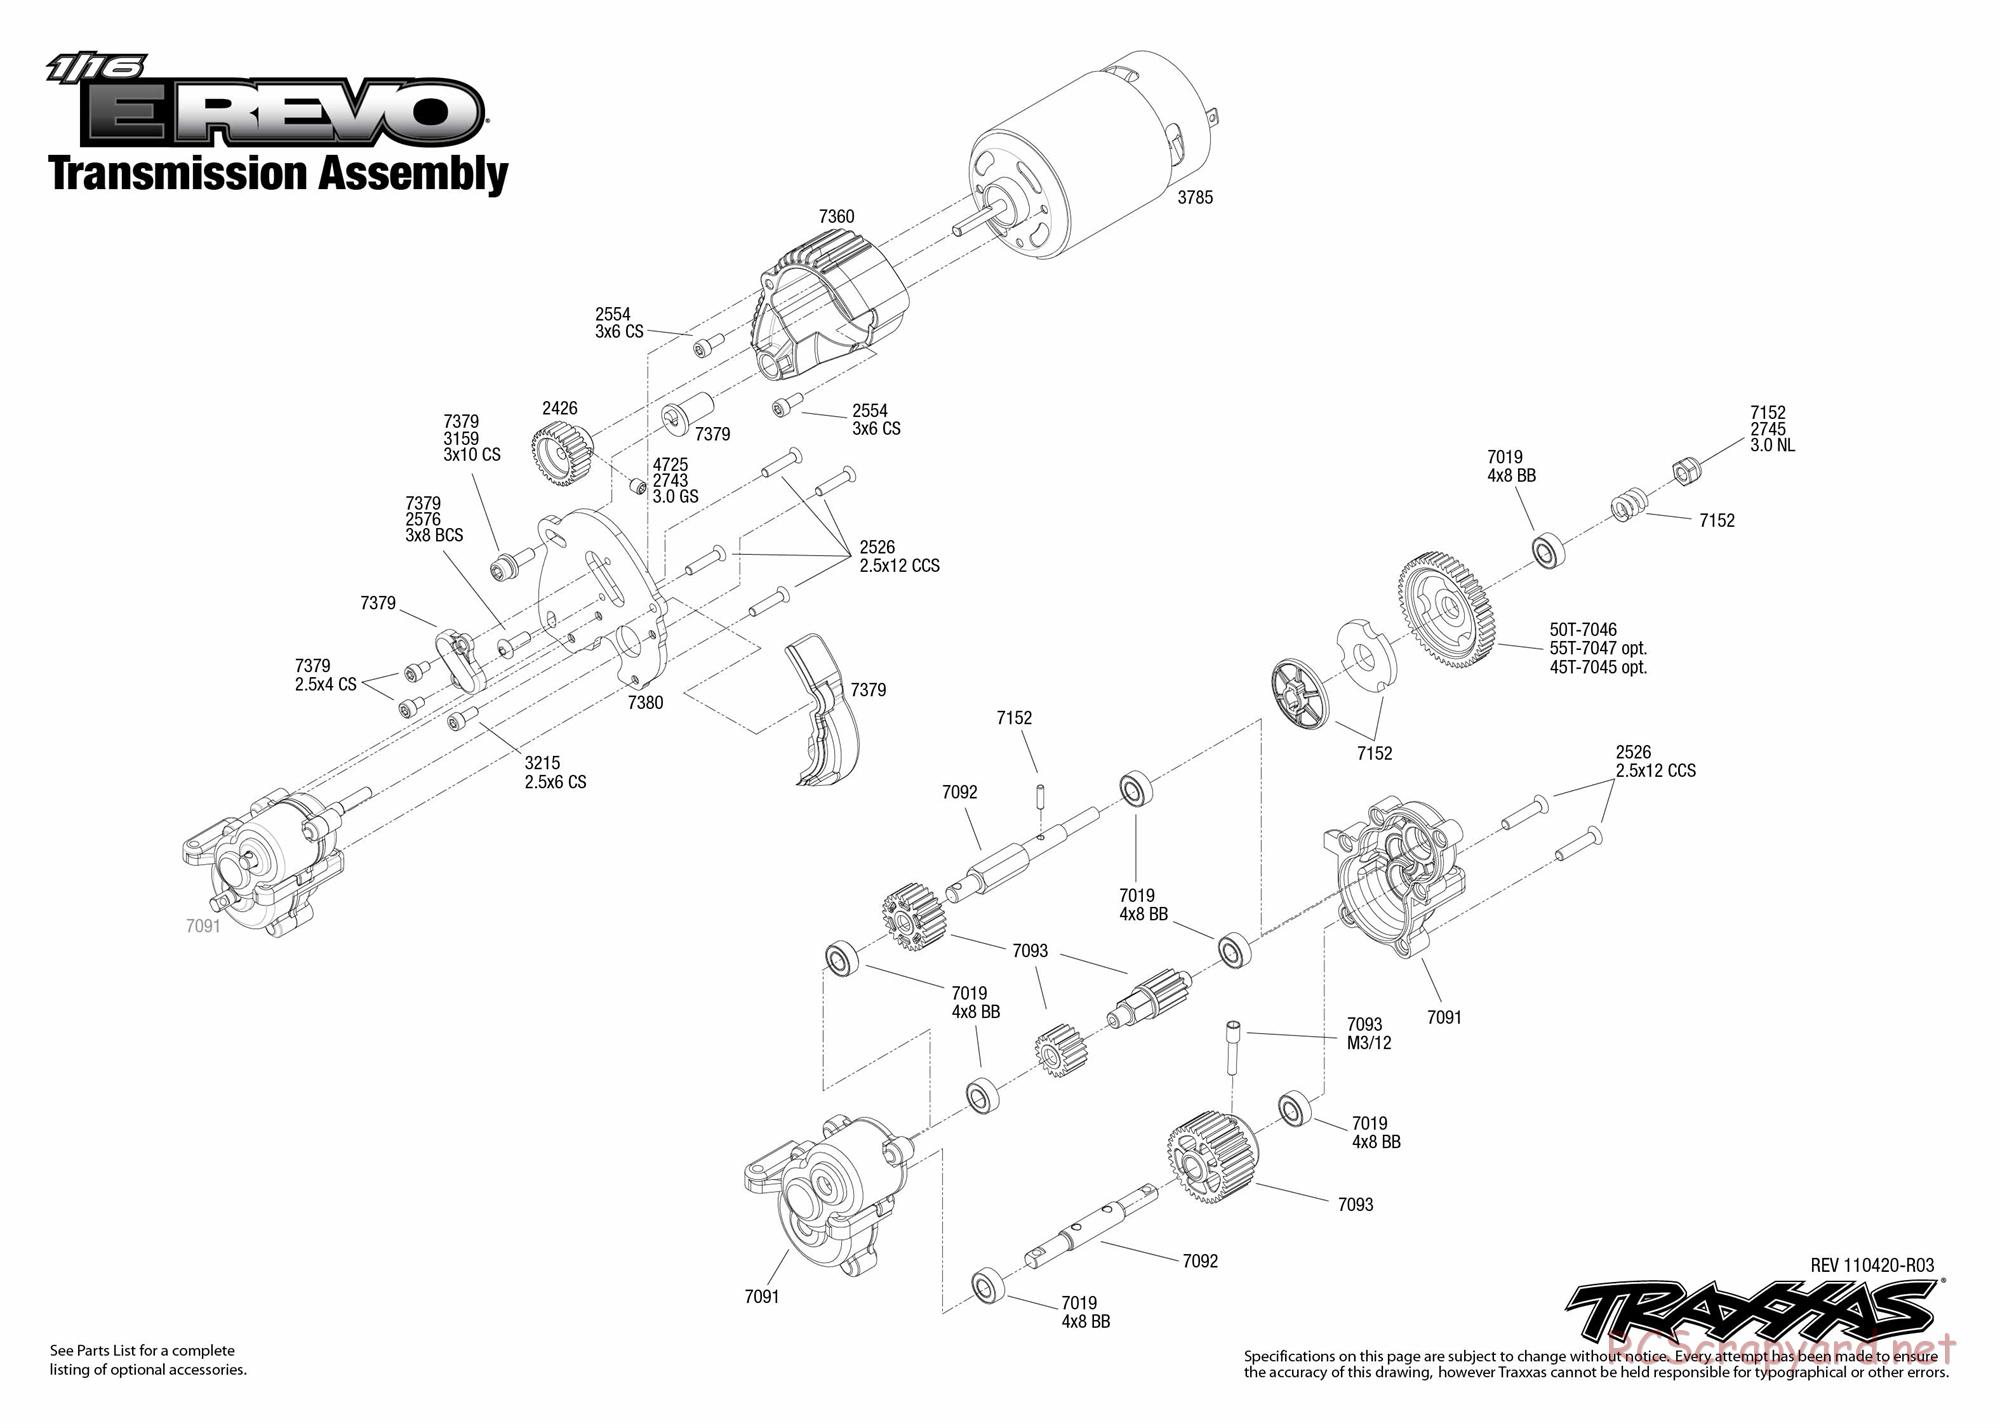 Traxxas - 1/16 E-Revo Brushed (2010) - Exploded Views - Page 4